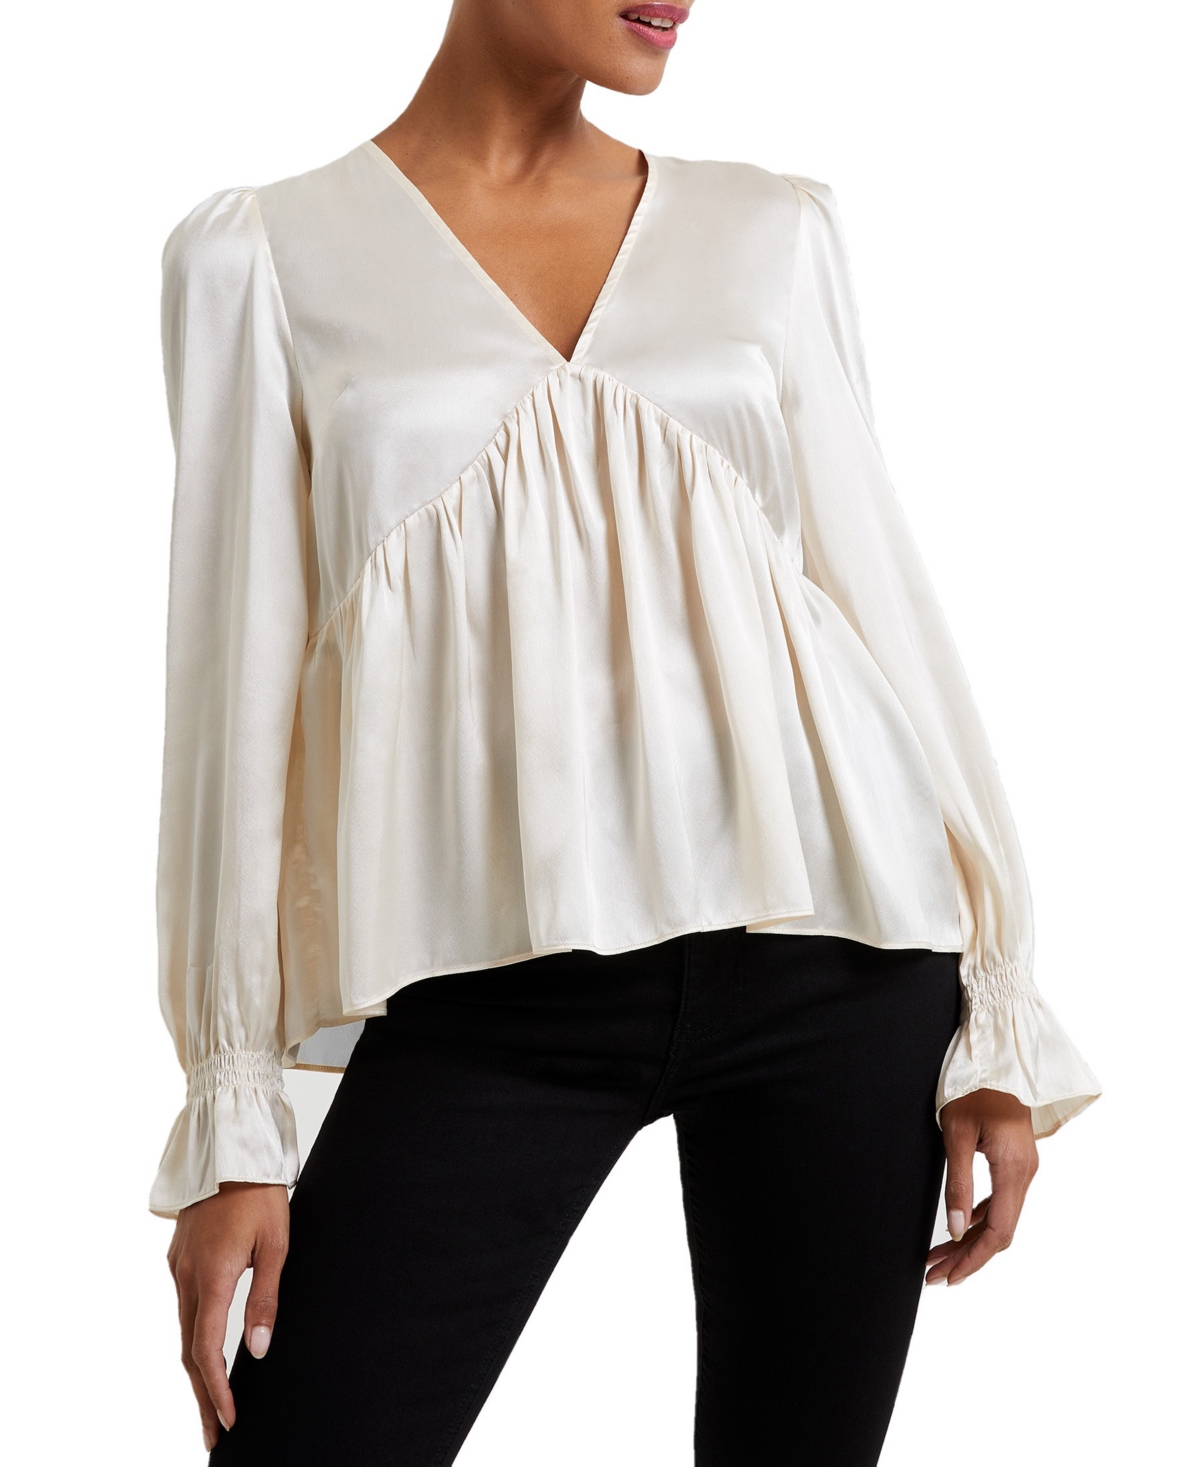 French Connection Women's Long-Sleeve Satin V-Neck Top